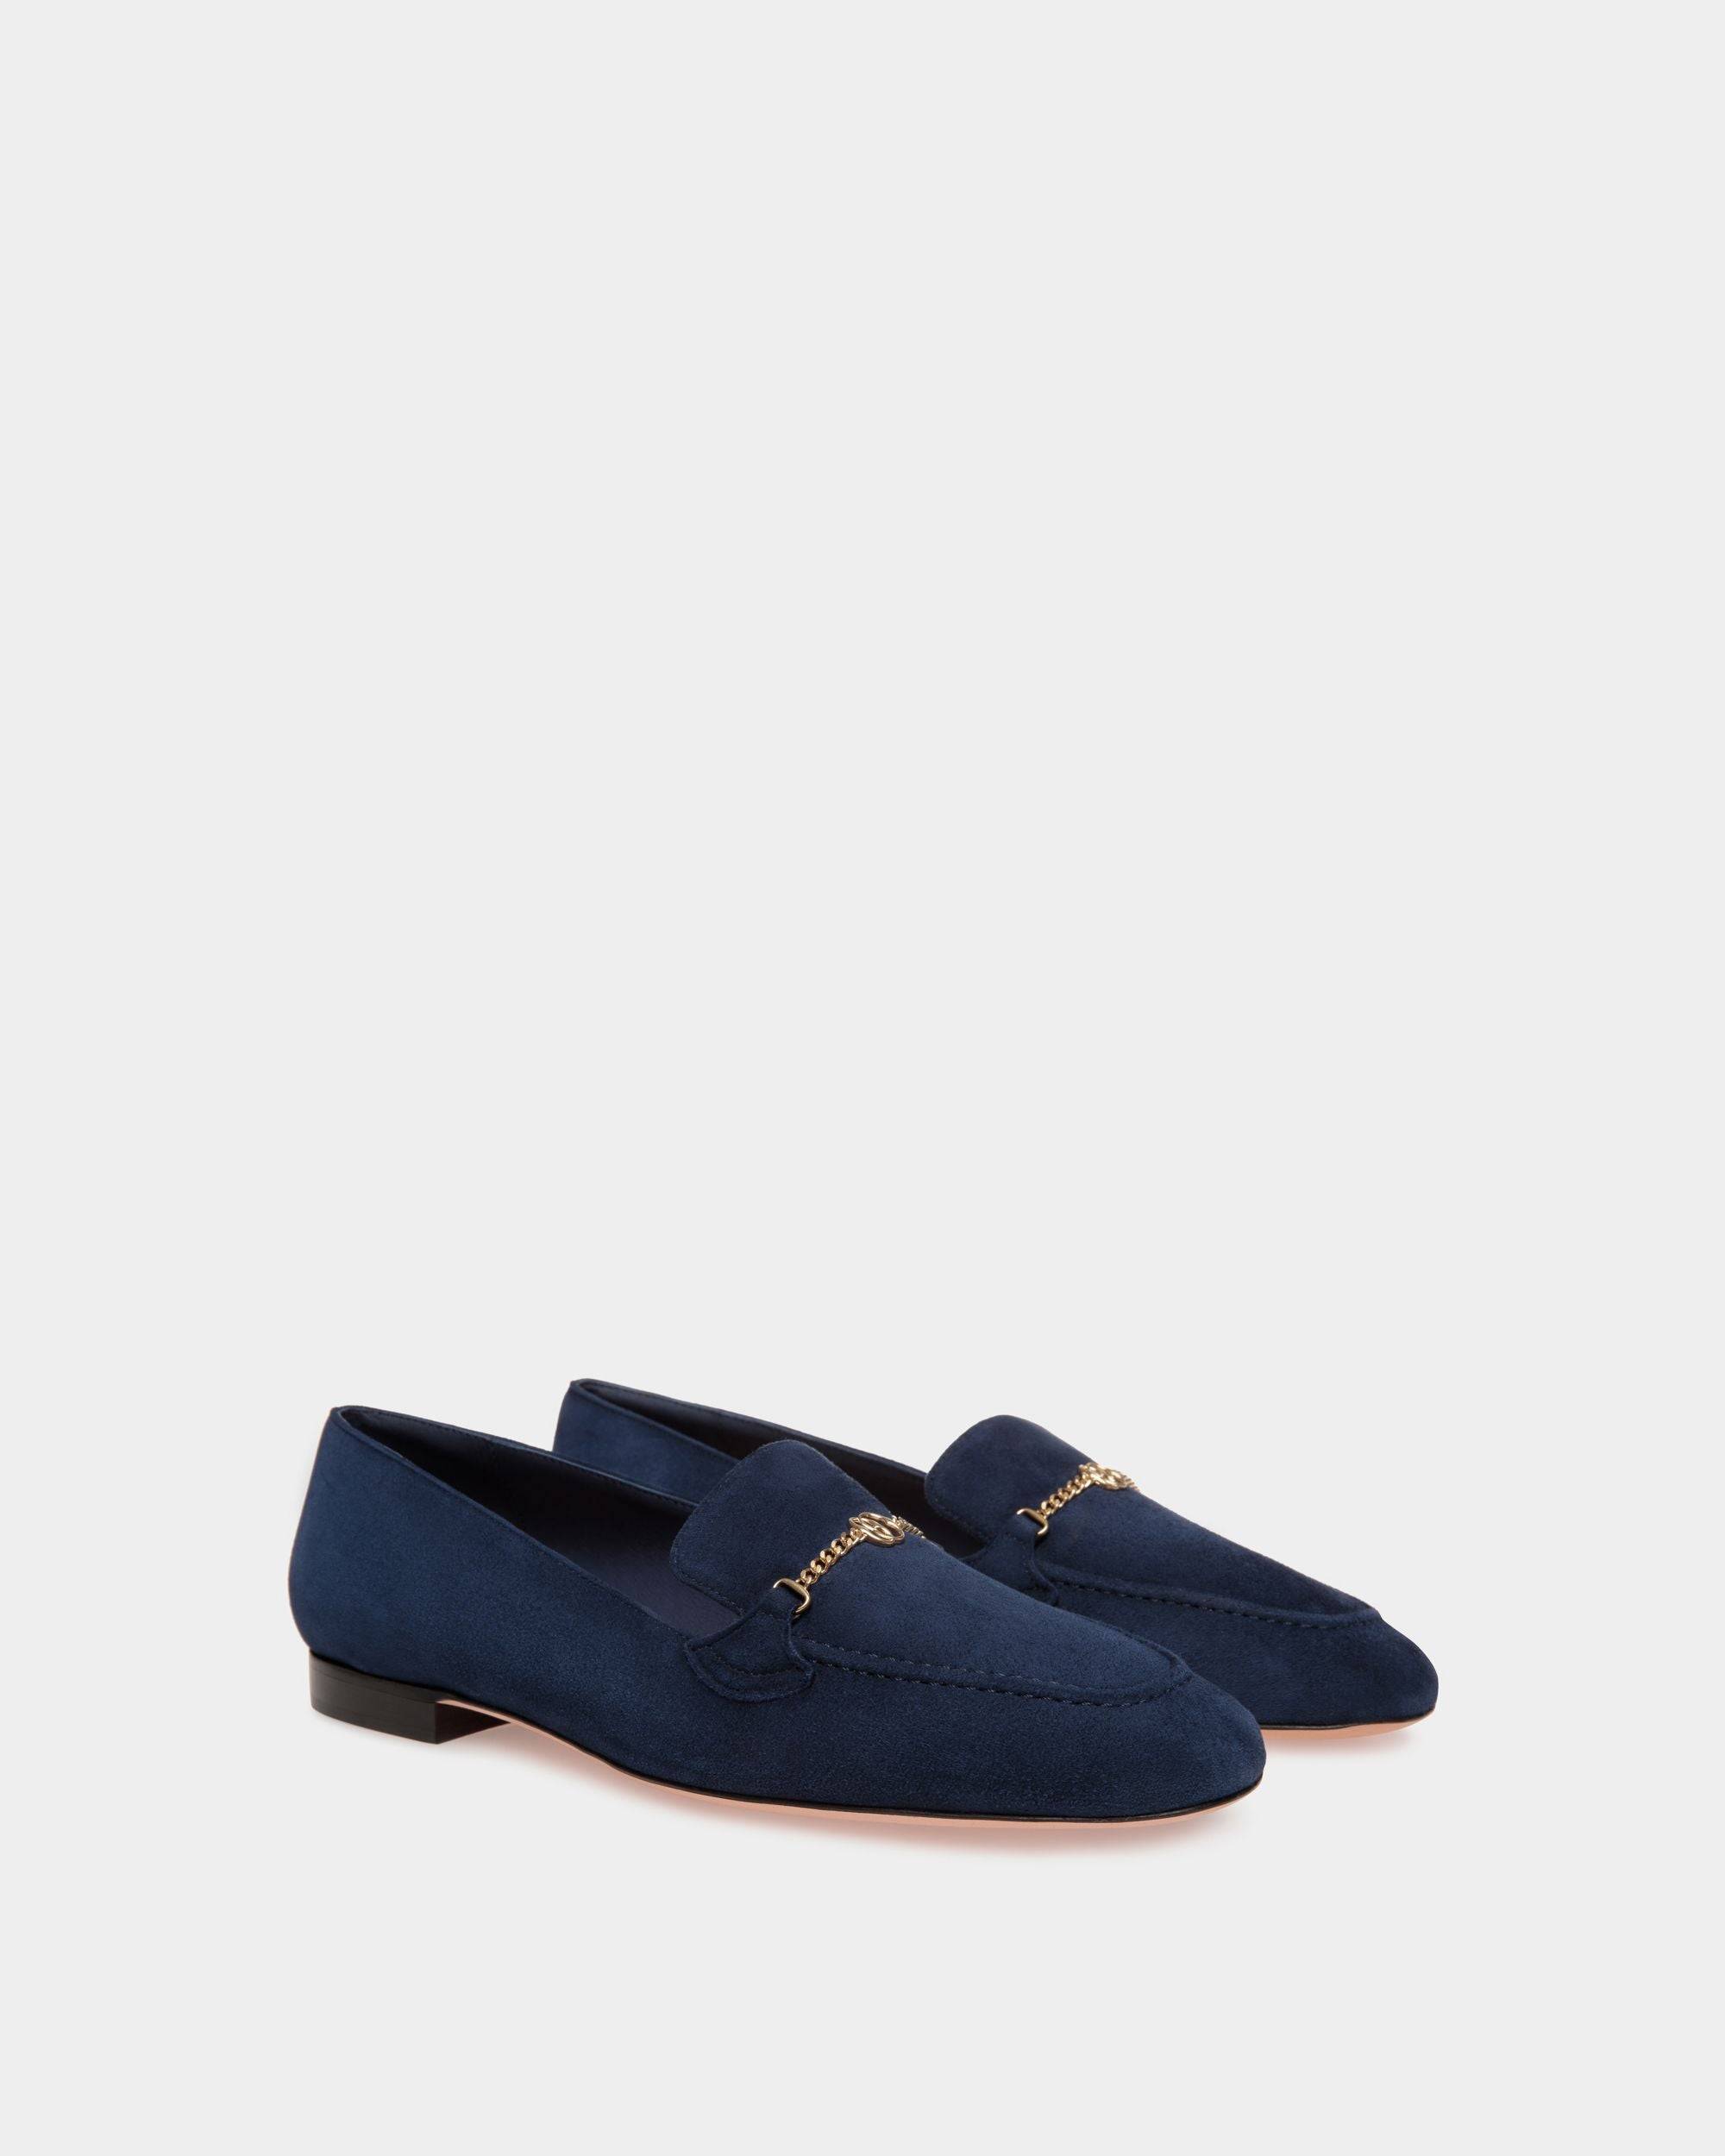 Daily Emblem | Women's Loafer in Blue Suede | Bally | Still Life 3/4 Front